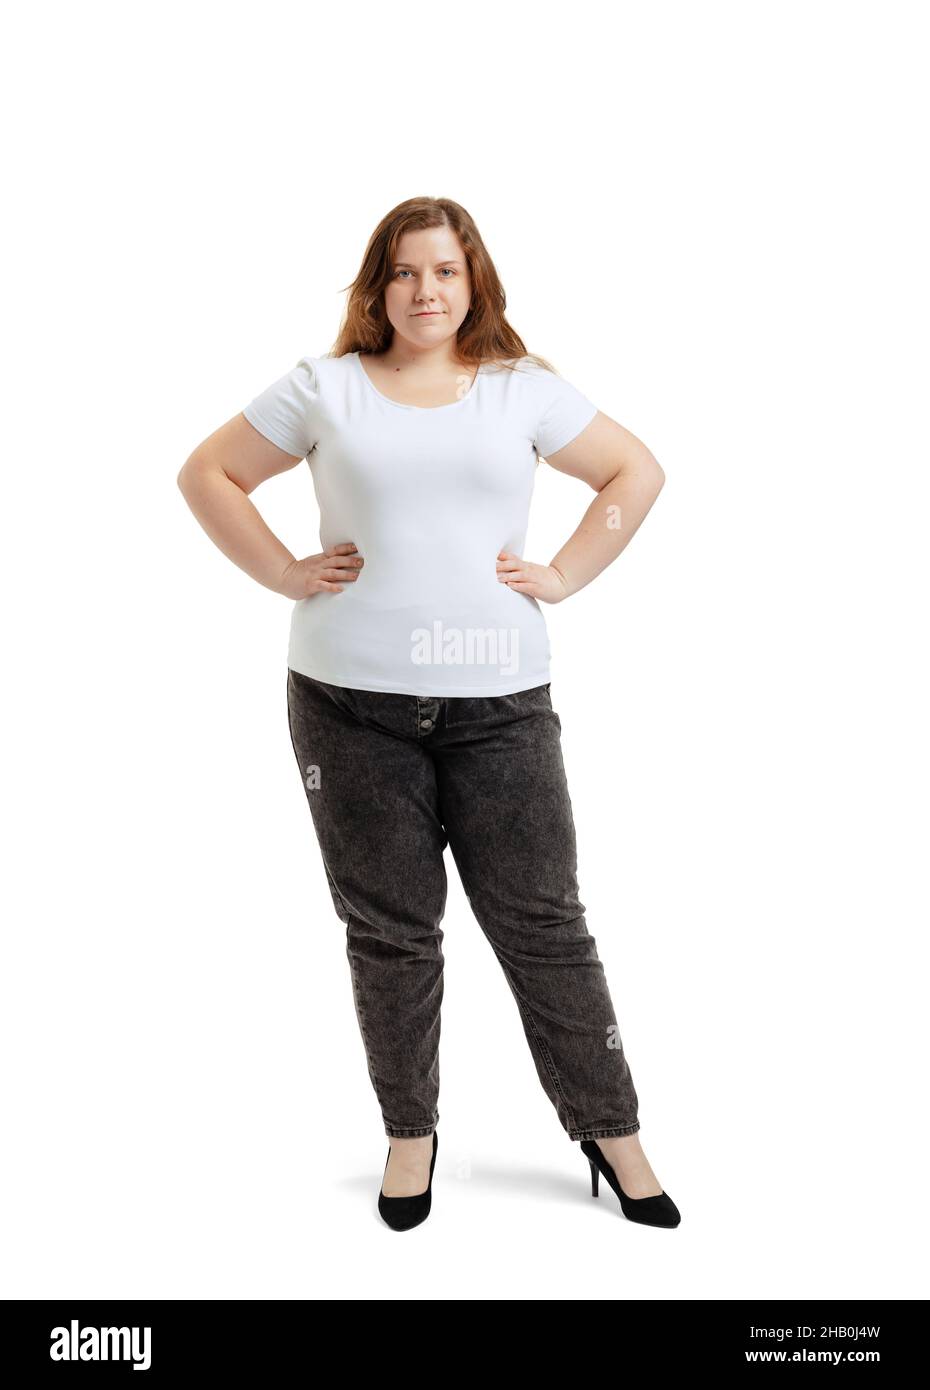 Full-length portrait of plus-size woman wearing white t-shirt and jeans posing isolated on white studio background. Body positive concept Stock Photo